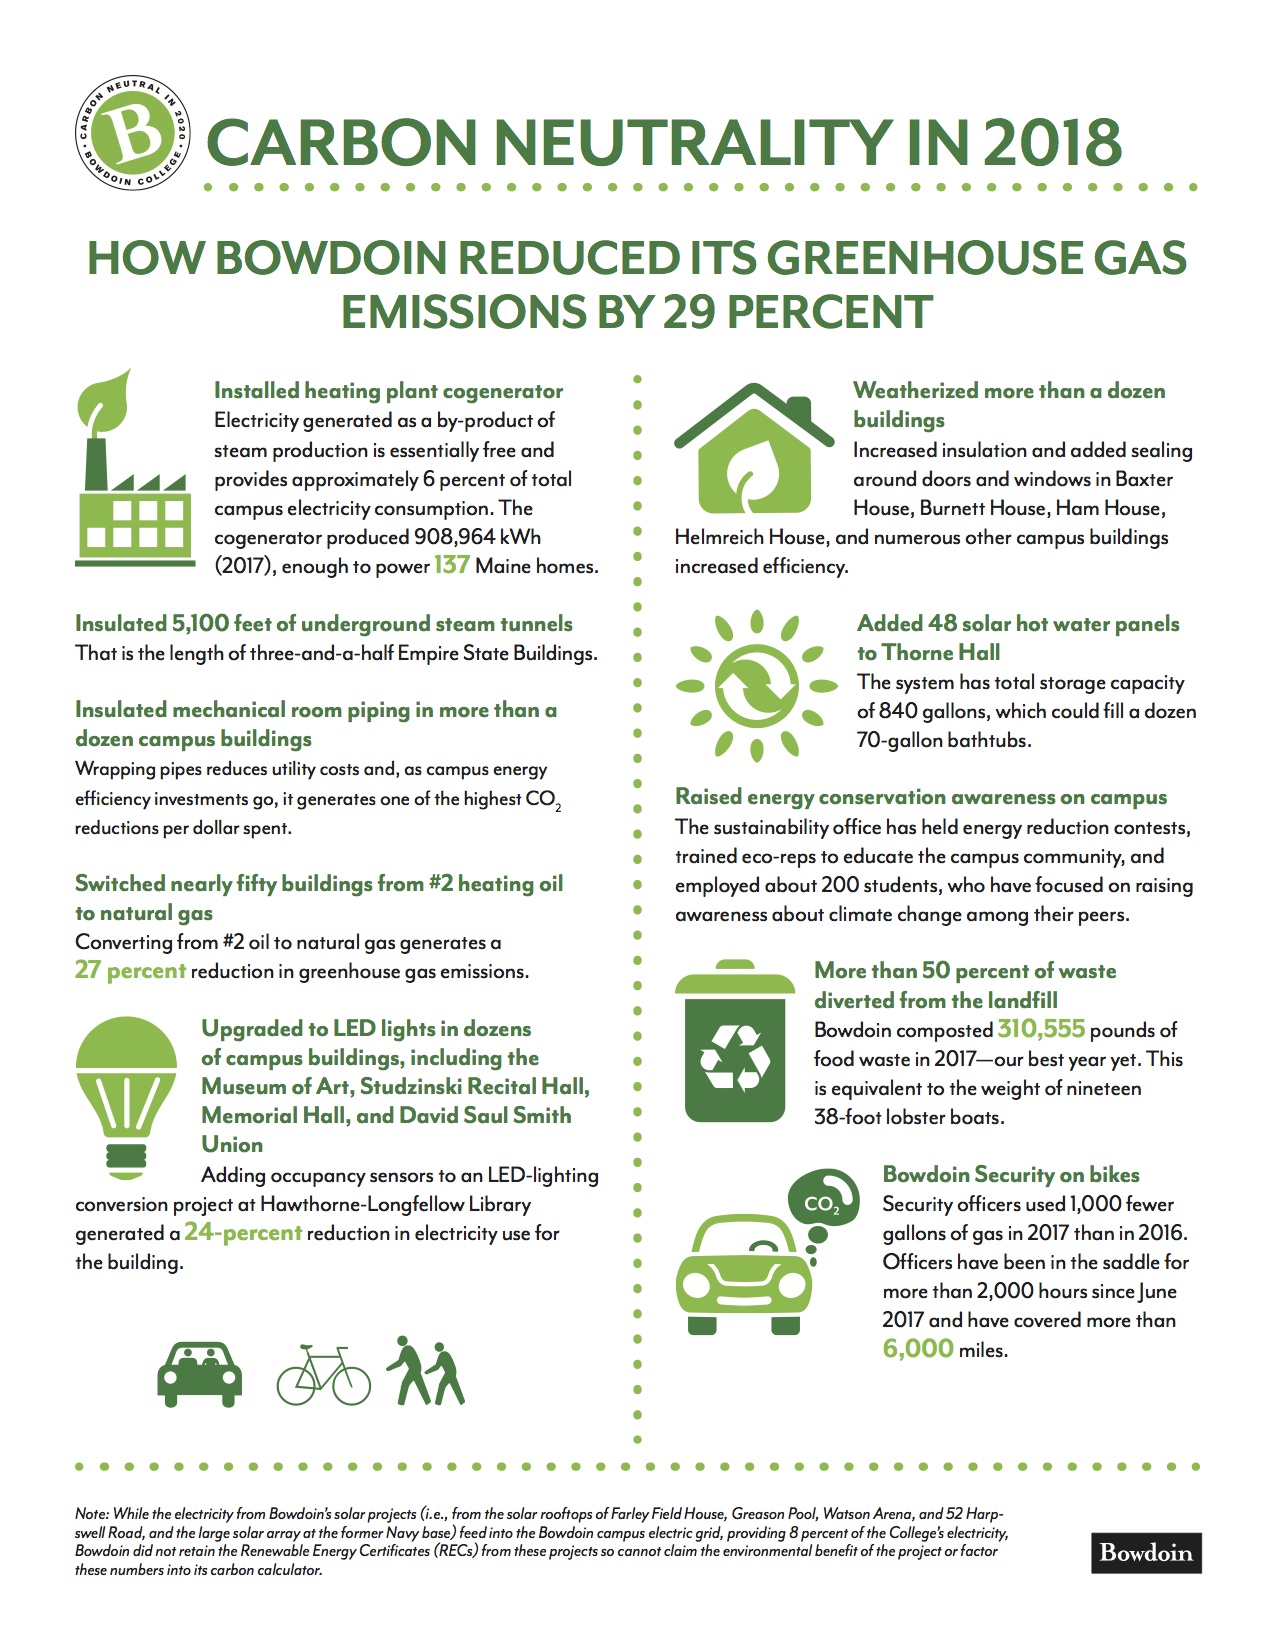 infographic of steps bowdoin took to achieve carbon neutrality